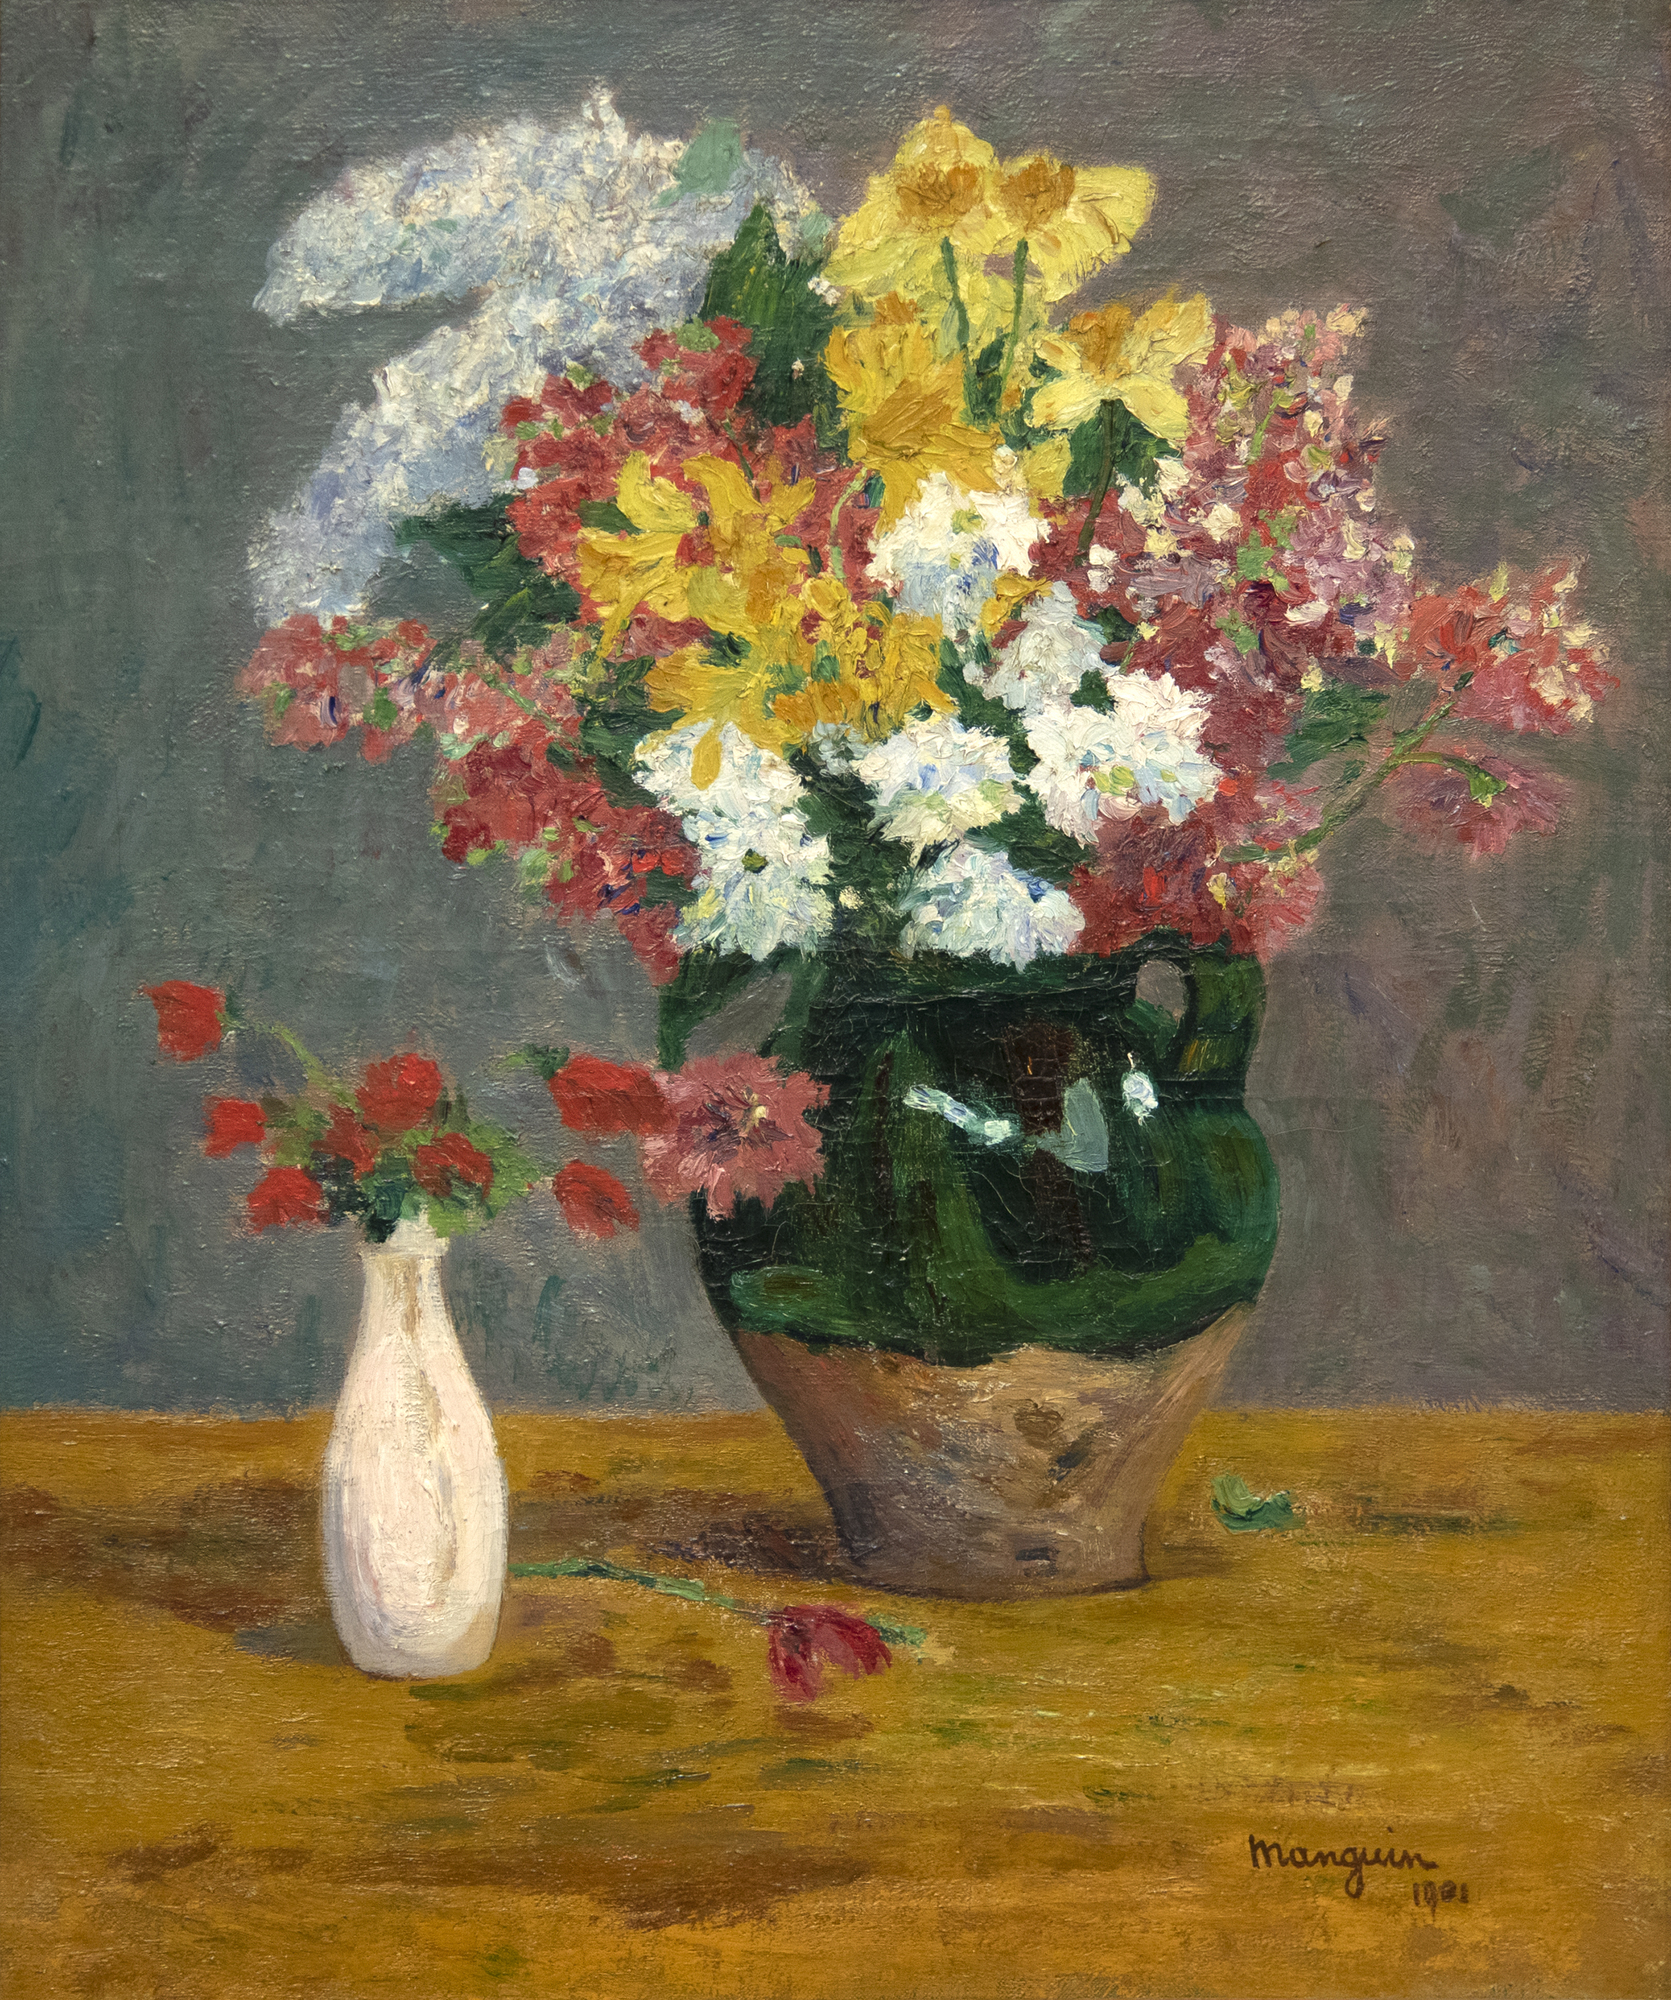 "Bouquets de Fleurs" (1901) is a glowing Post-Impressionist still life. As the revolutionary wave of Impressionism receded from its apex, artists such as Henri Manguin, Henri Matisse, Kees van Dongen, Louis Valtat, and others emerged as part of the new avant-garde in Europe. These “Fauves,” or roughly translated “wild beasts,” would attack their canvases with a bold and vibrant new palette. This completely new way of painting was not initially celebrated by critics, or the artistic elite, but is today recognized among the most innovative and original artistic movements of the 20th Century.    <br><br>The present work, painted just before the revolution of Fauvism took hold, demonstrates a critical transitionary period in Modern Art. The subject is depicted with a masterful compositional sense and attention to spatial relationships. Manguin’s competency in composition would allow him to experiment freely with color during the first decade of the 20th Century. The slightly later but comparable Manguin still life “Flowers” (1915) is in the permanent collection of the Hermitage Museum, St. Petersburg, Russia.